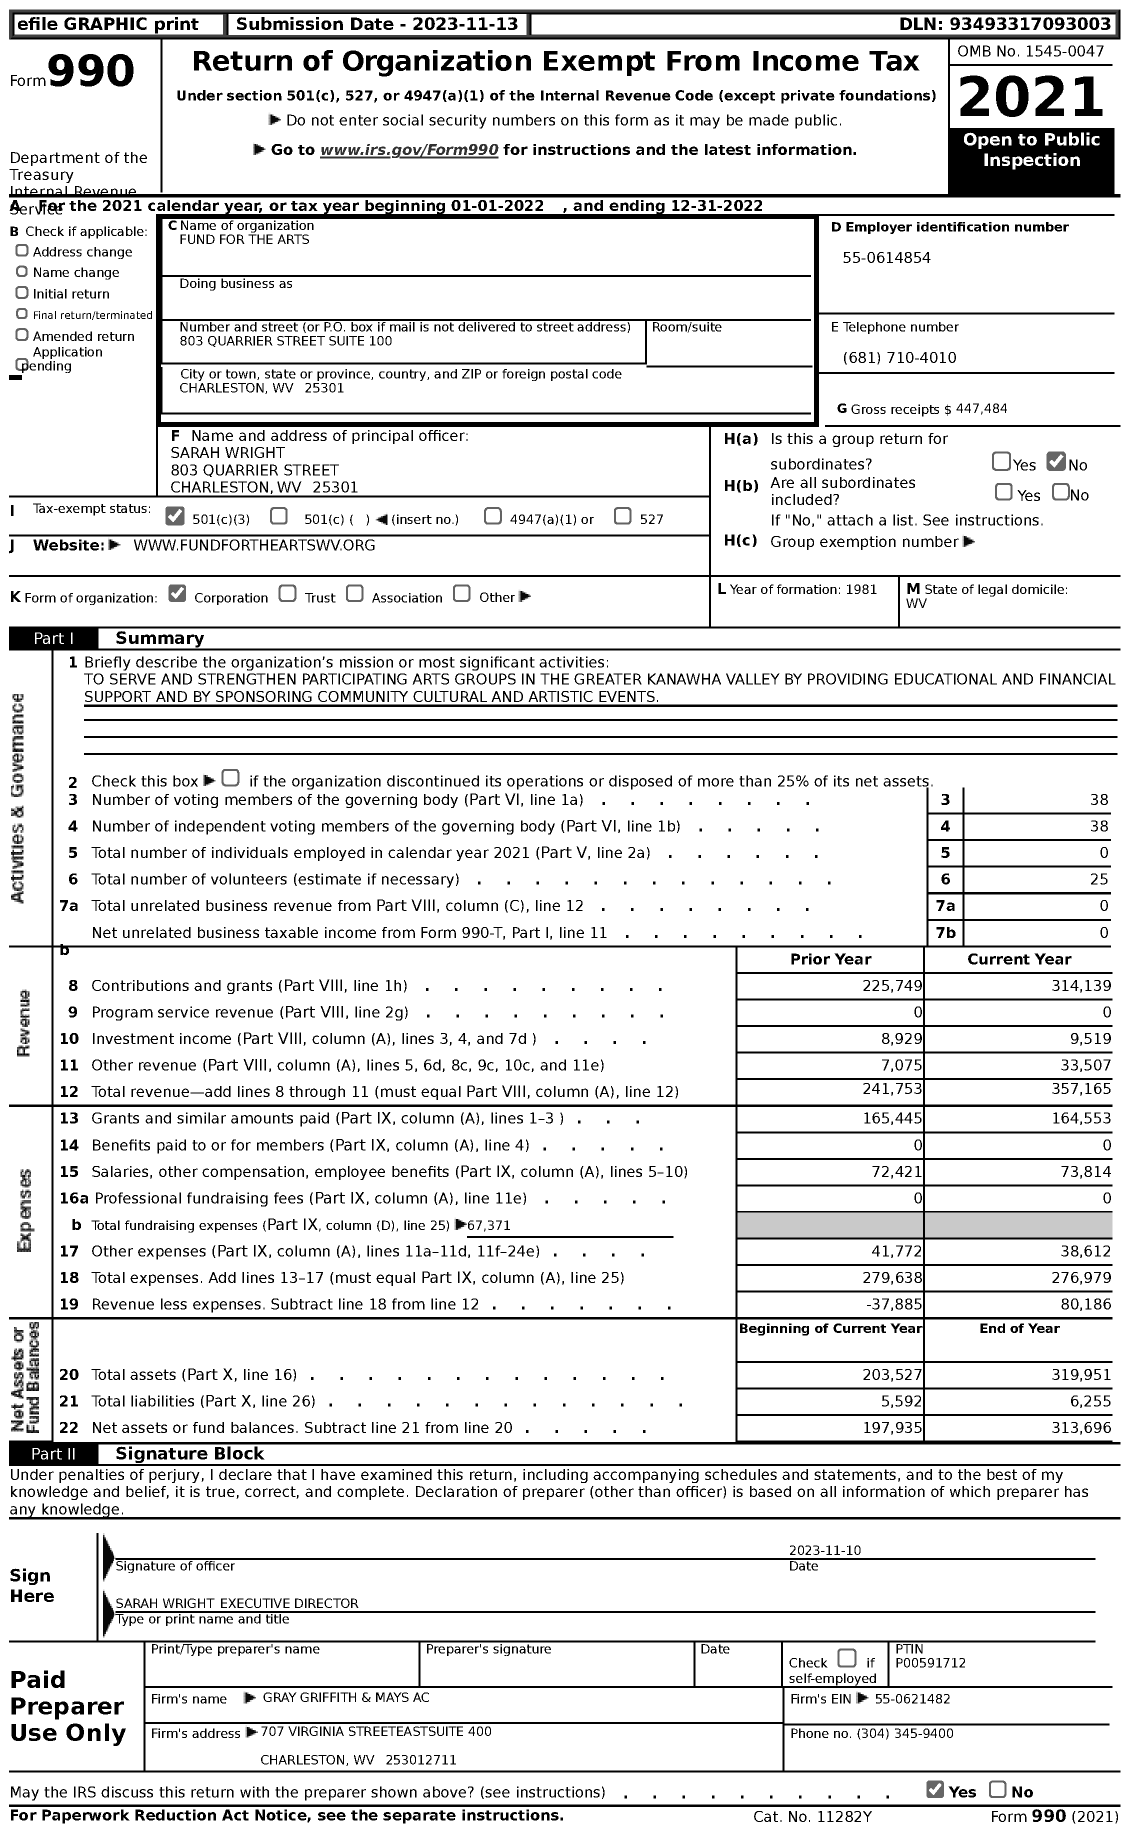 Image of first page of 2022 Form 990 for Fund for the Arts